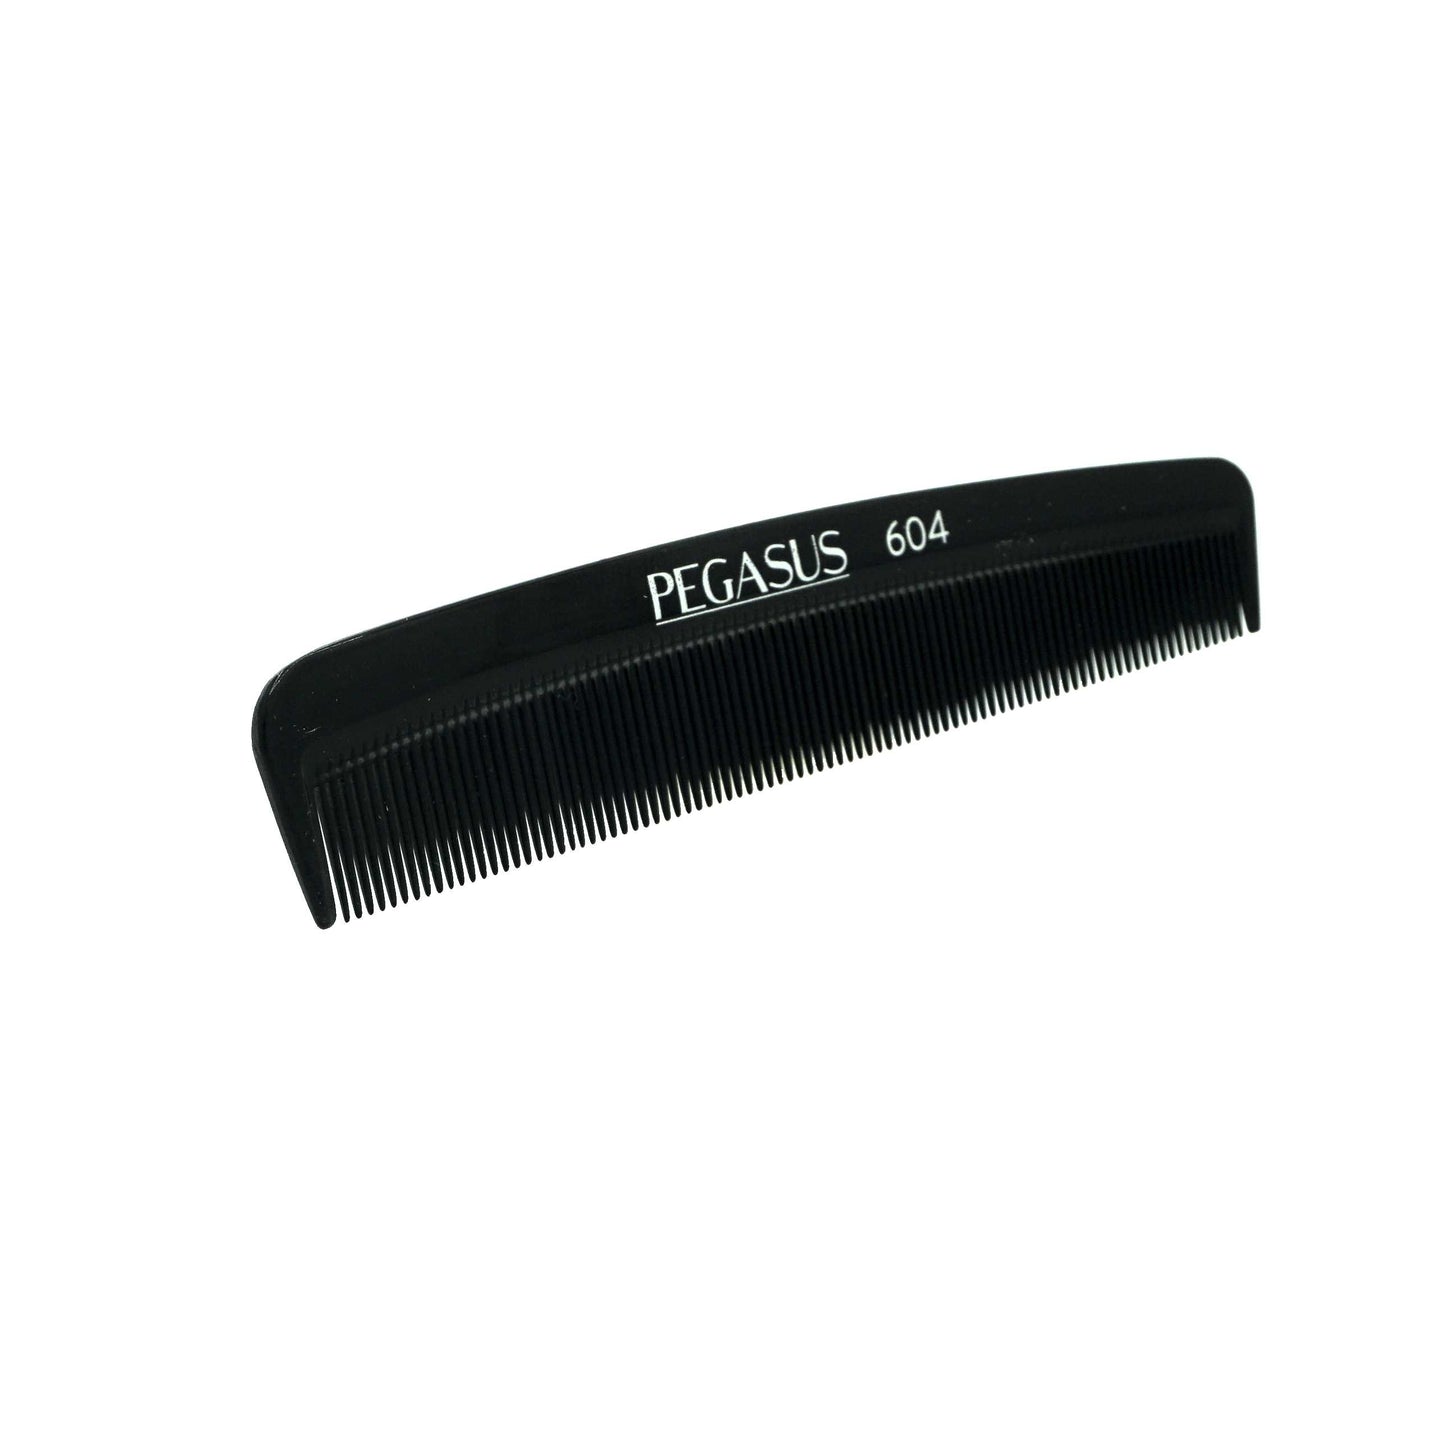 Pegasus 604, 5in Hard Rubber Fine Tooth Pocket Comb, Handmade, Seamless, Smooth Edges, Anti Static, Heat and Chemically Resistant, Portable Pocket Purse Mustache Comb | Peines de goma dura - Black